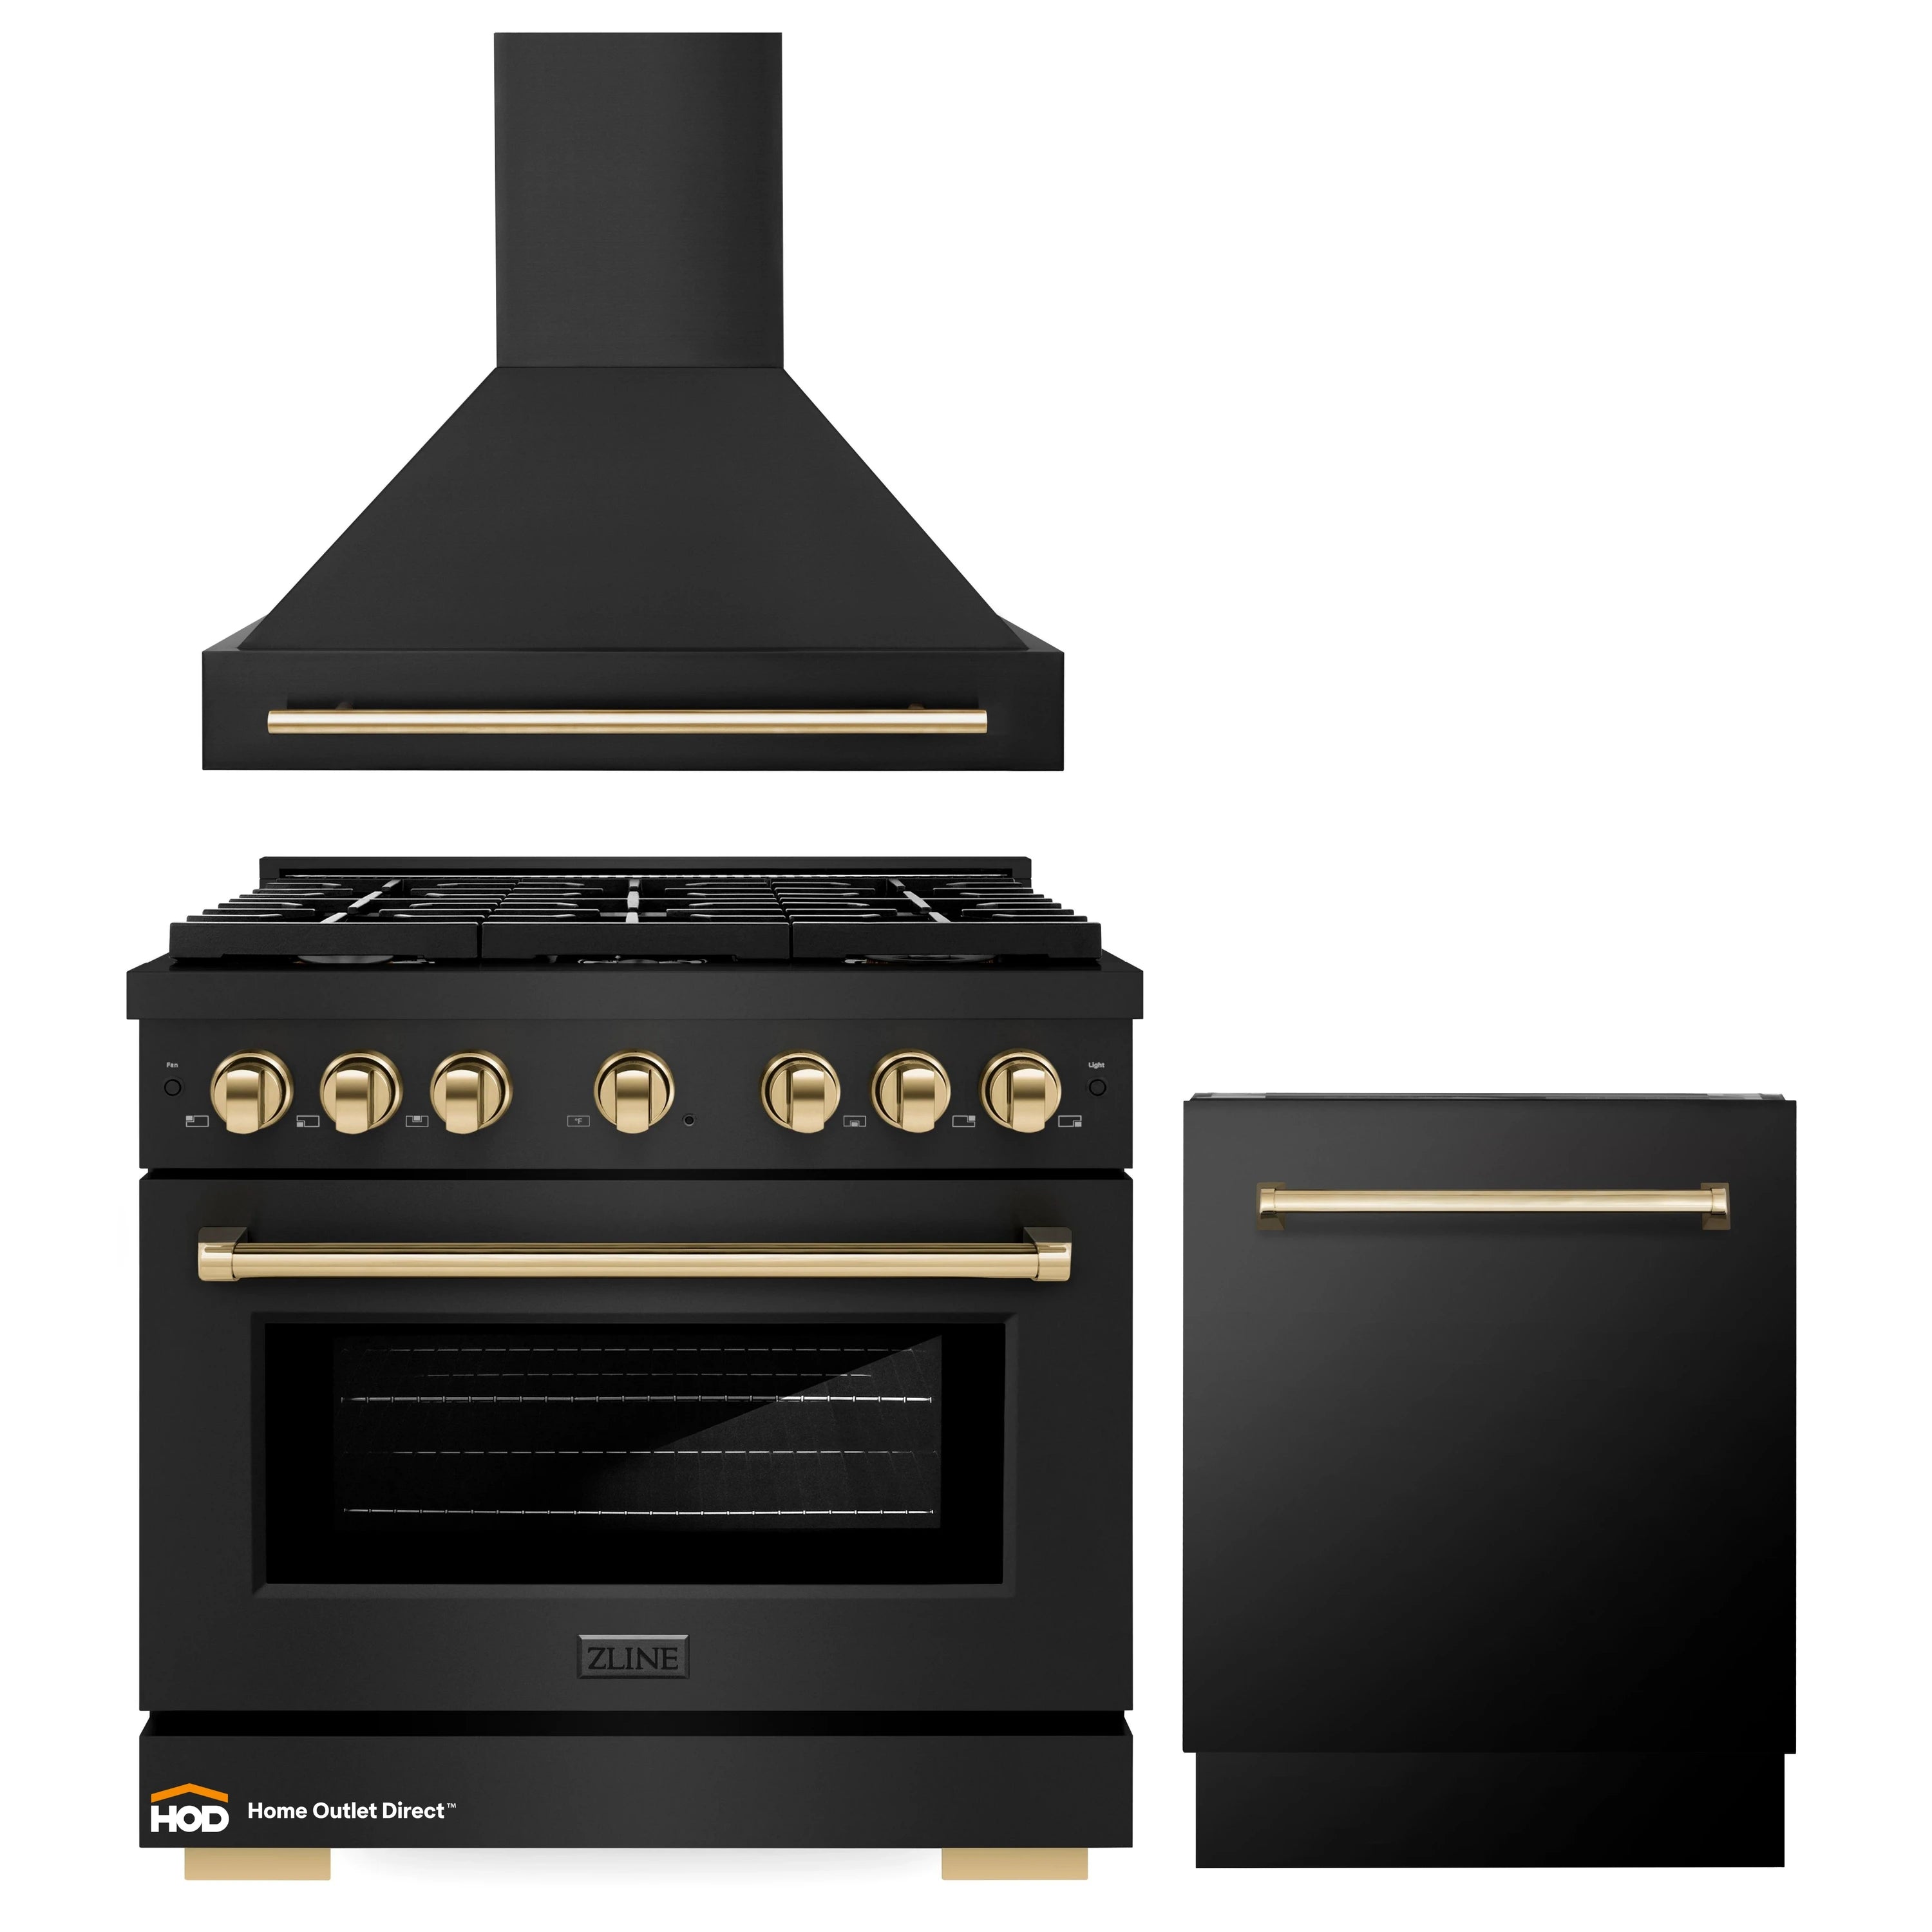 ZLINE Autograph Edition 3-Piece Appliance Package - 36-Inch Gas Range, Wall Mounted Range Hood, & 24-Inch Tall Tub Dishwasher in Black Stainless Steel with Gold Trim (3AKP-RGBRHDWV36-G)